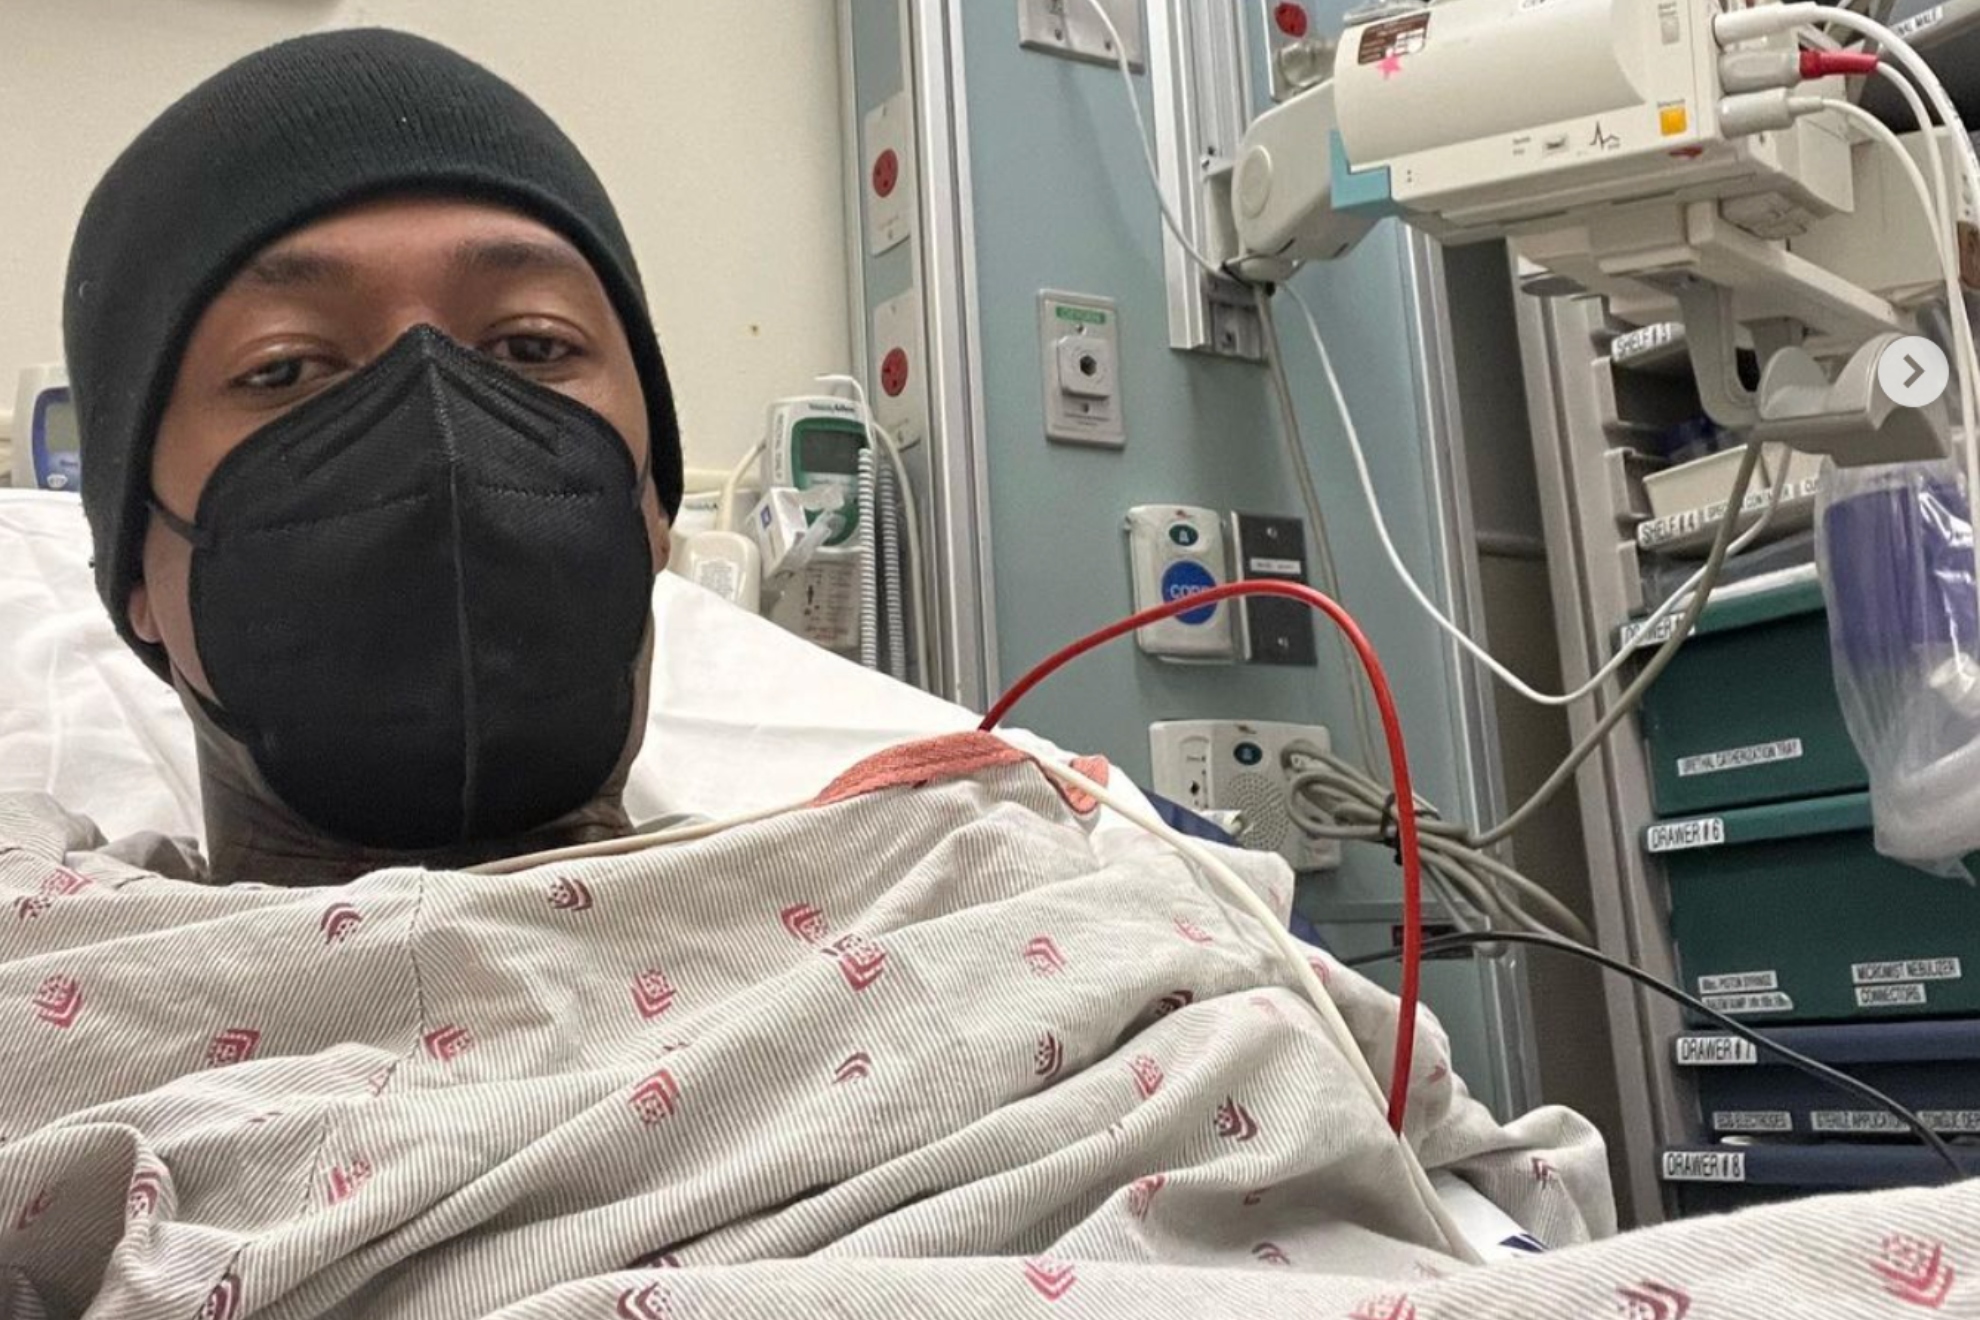 Nick Cannon at the hospital